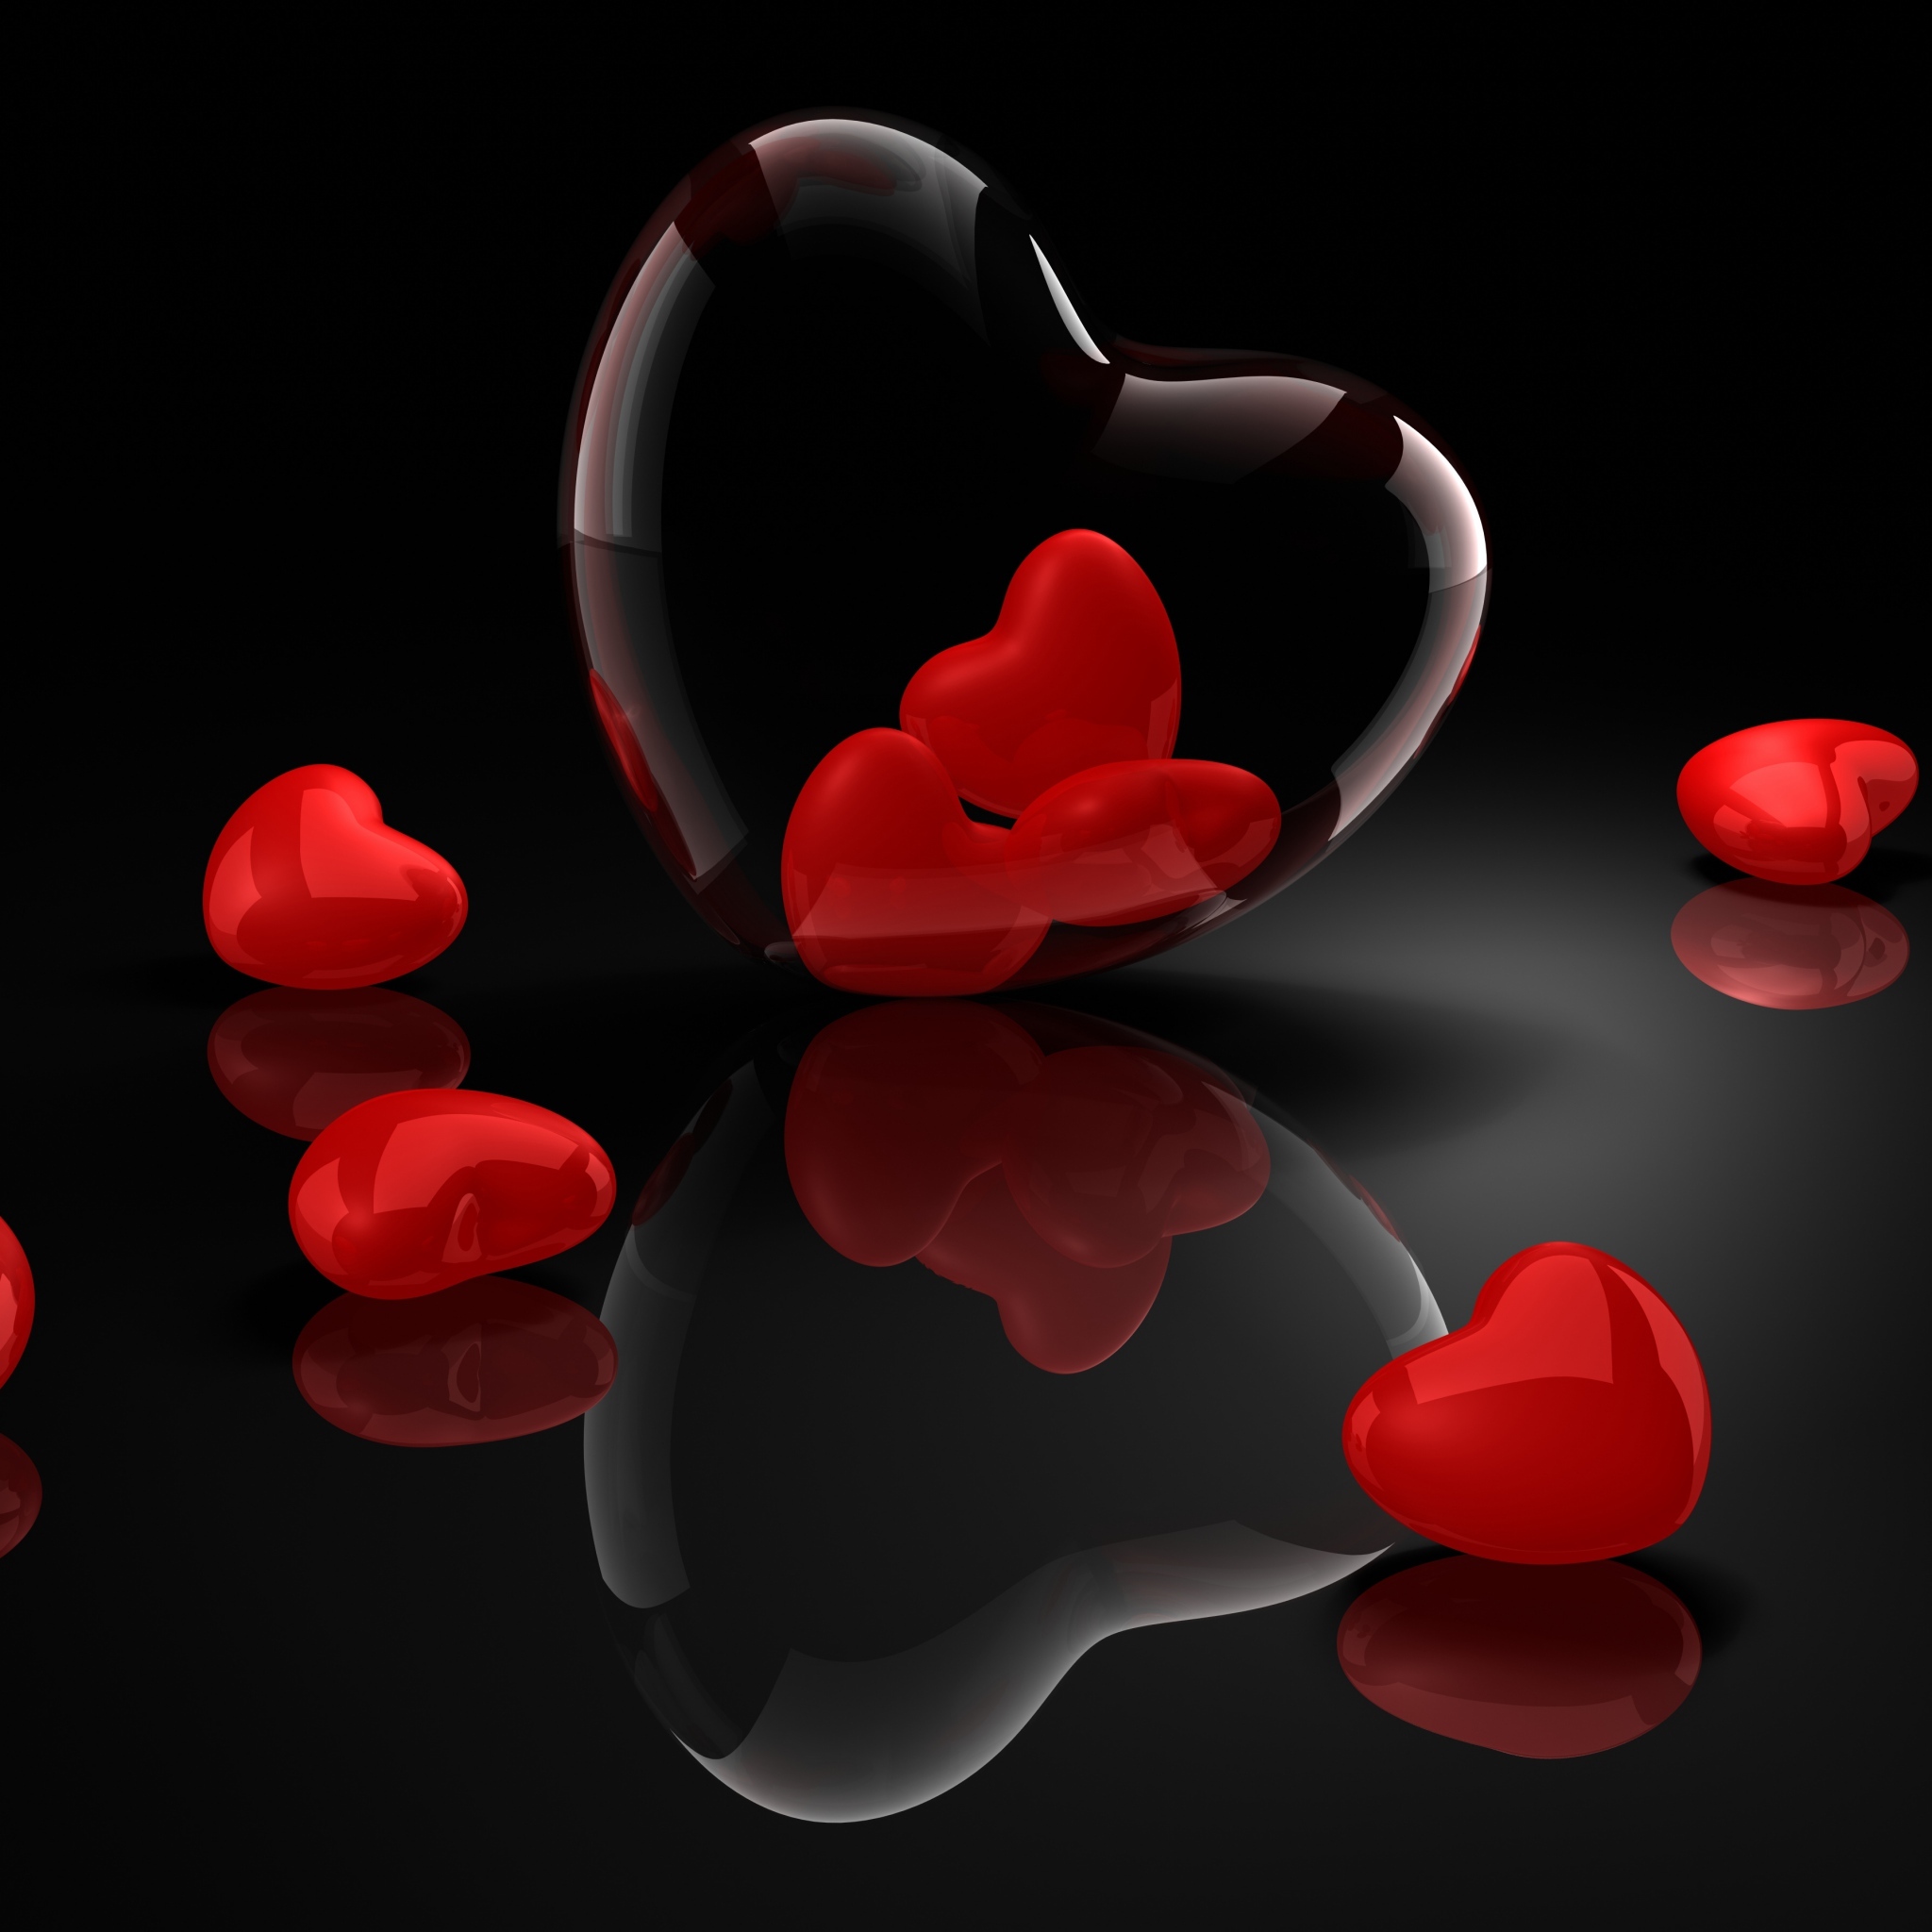 Big heart shape item with white circle stones 2K wallpaper download